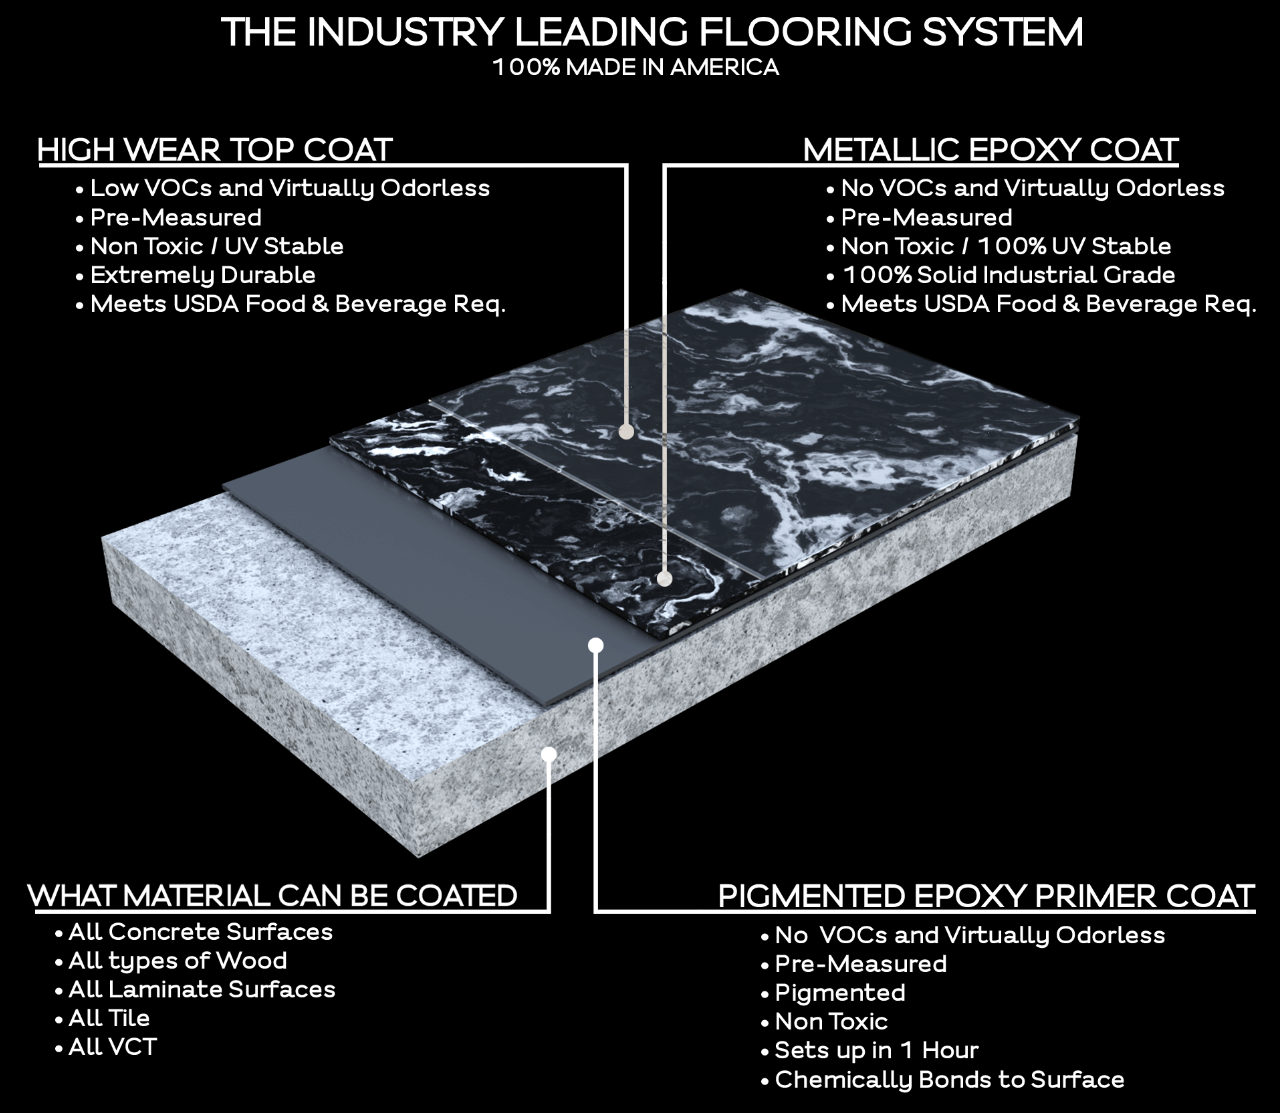 Detailed 3-D render of a metallic epoxy floor highlighting the benefits and strength of this type of flooring system.